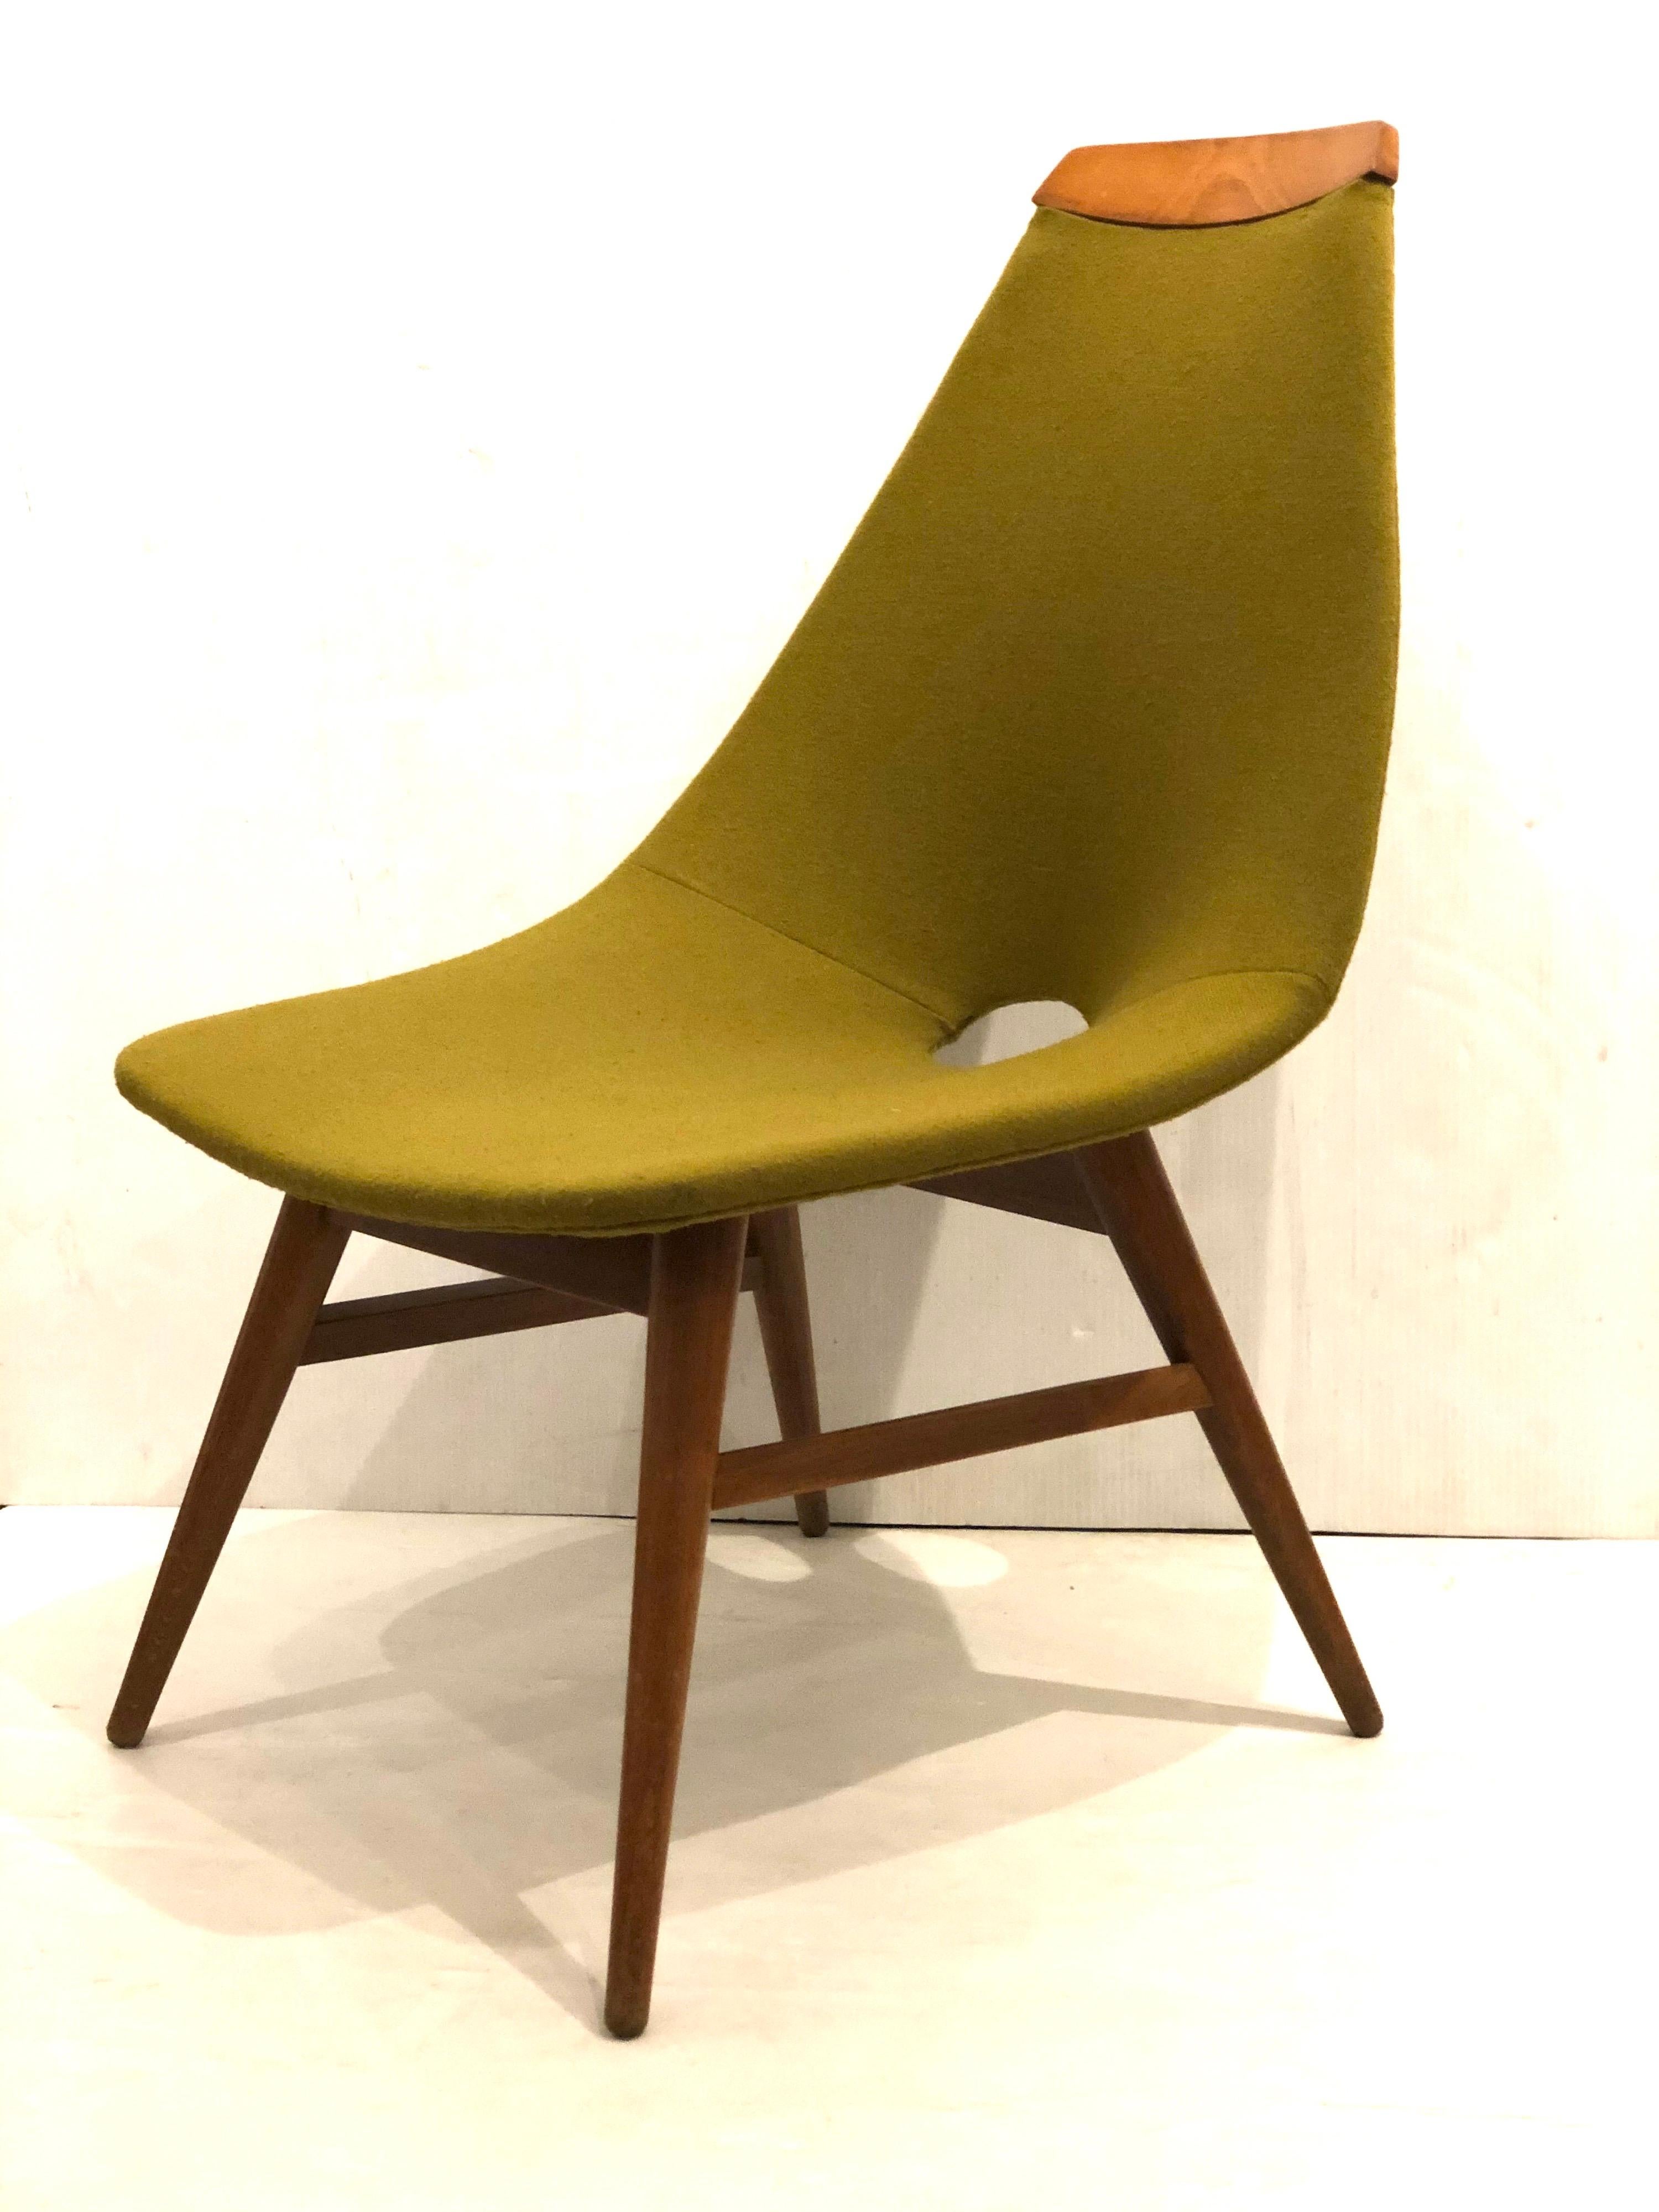 Burian Judit, Hungarian origin interior designer was inspired by the Scandinavian design of the 1950s. She designed the Erika chairs in 1959. A very elegant and comfortable petit model. The ashwood frame and the original green colored fabric.
 